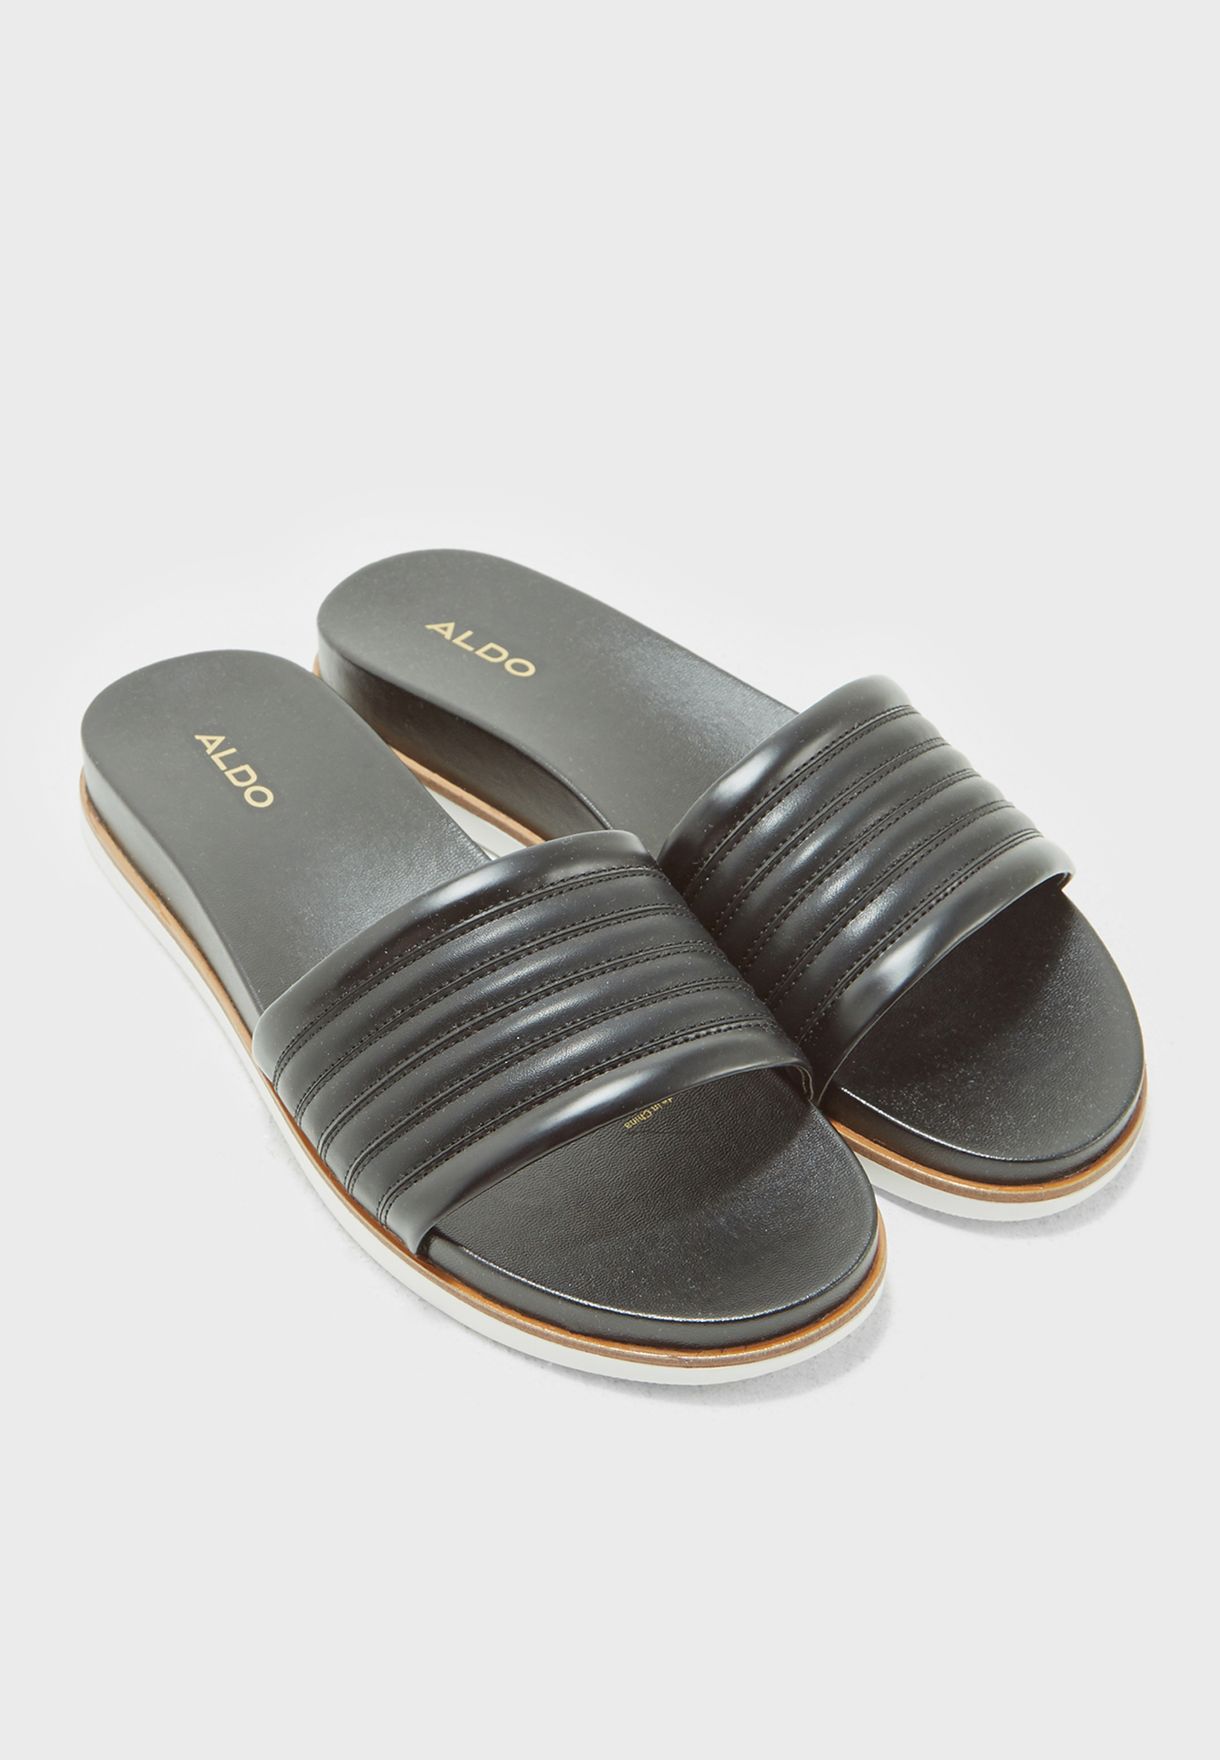 aldo shoes slippers